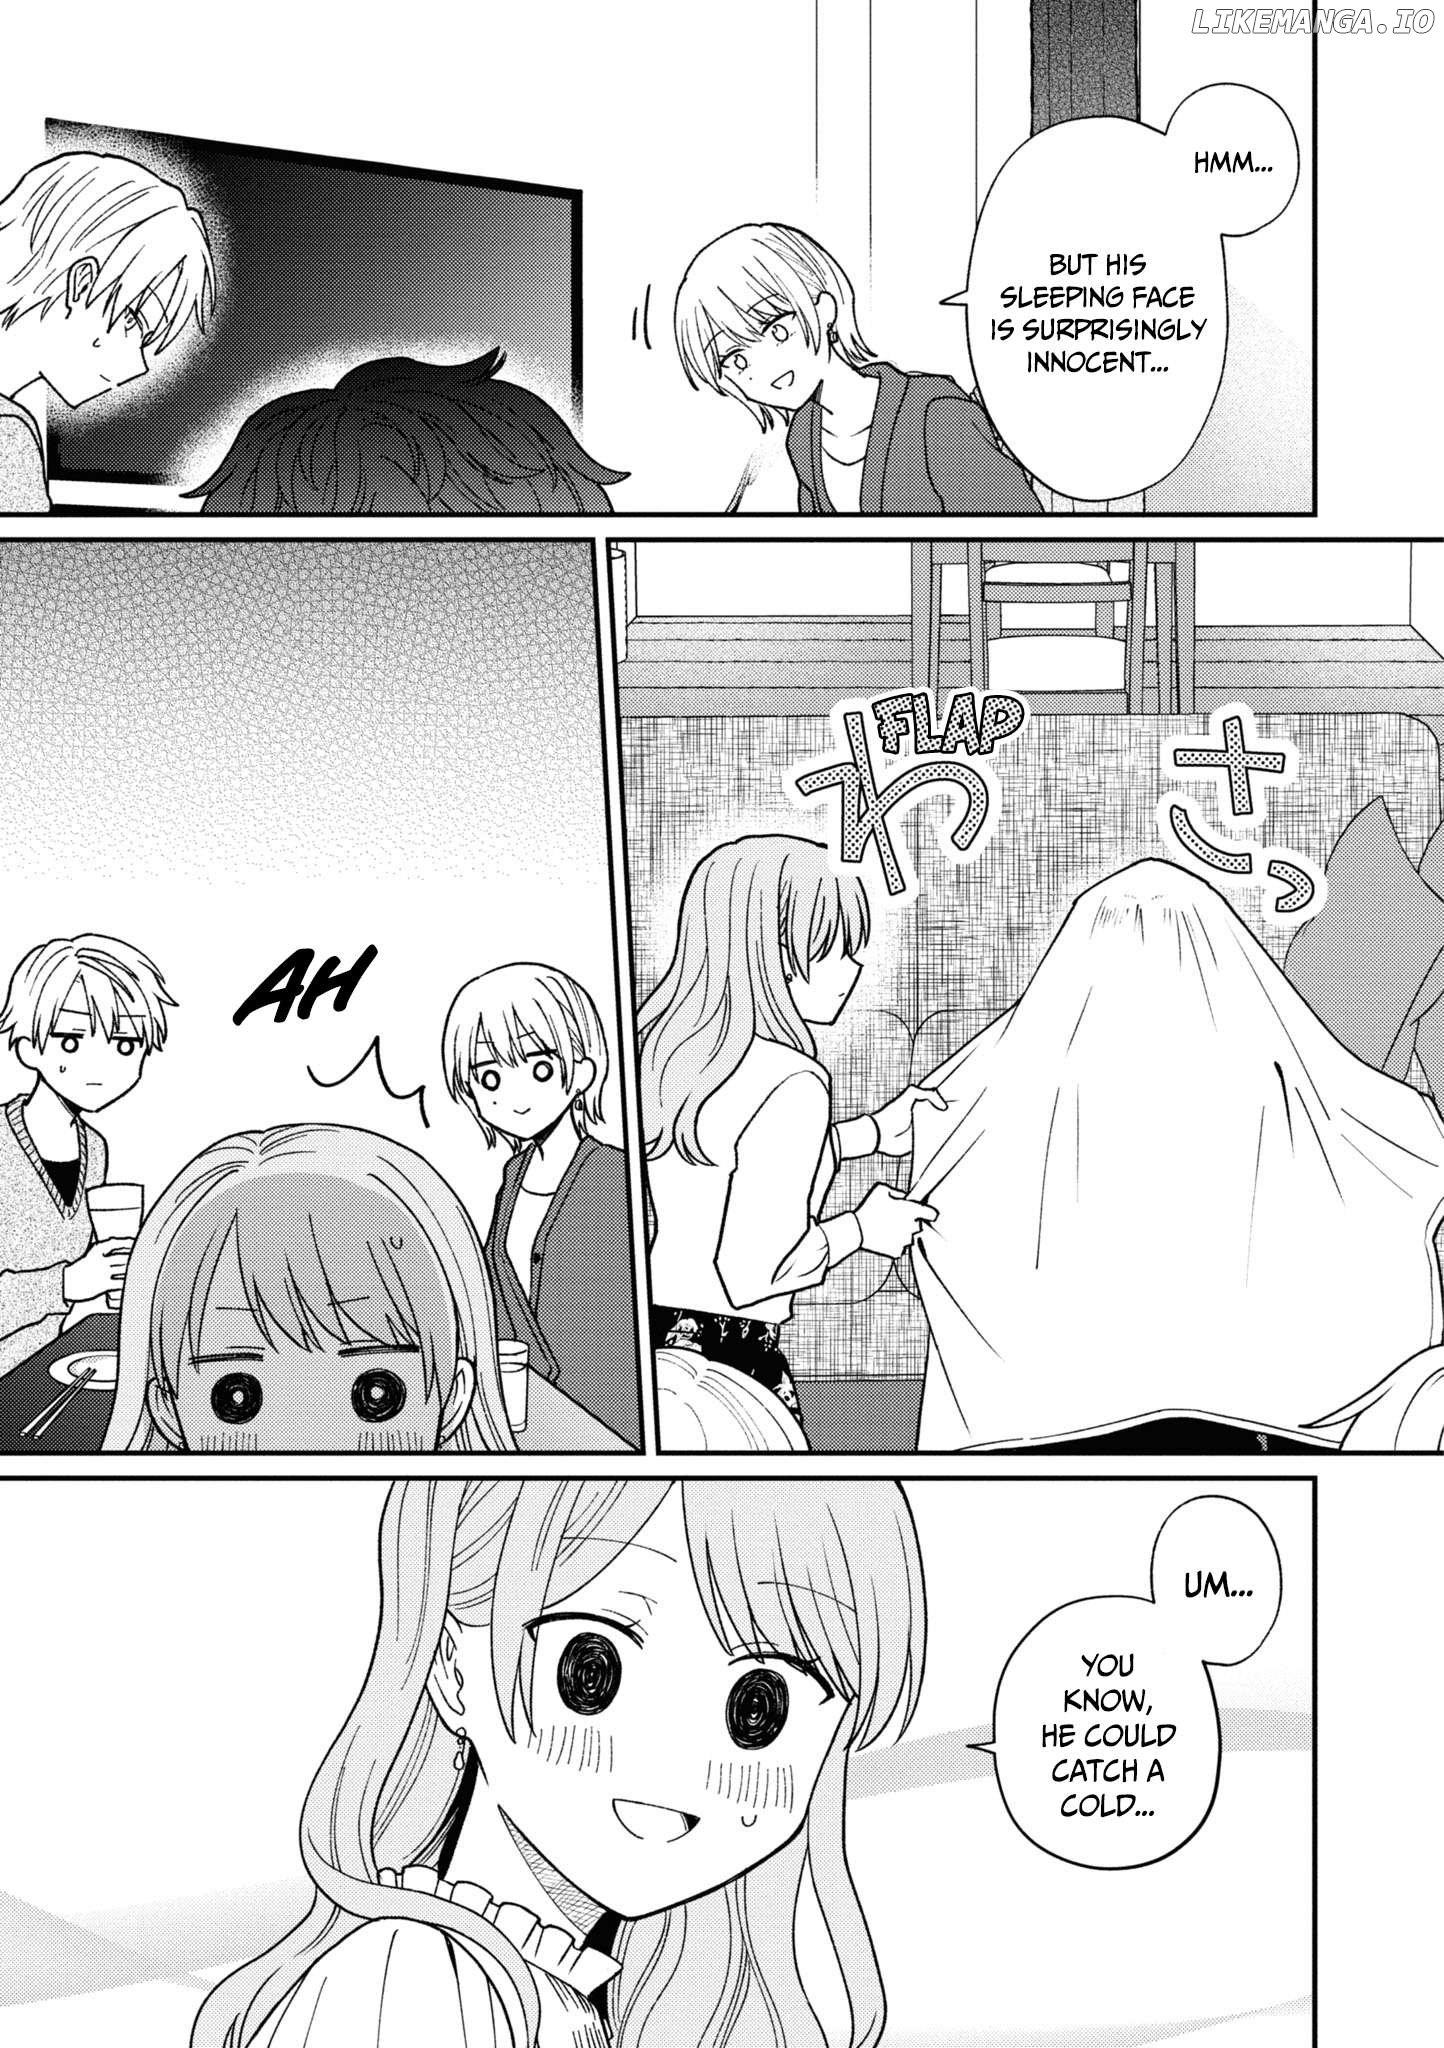 The New-Hire Who Could "Read" Emotions and the Unsociable Senpai - chapter 38 - #6